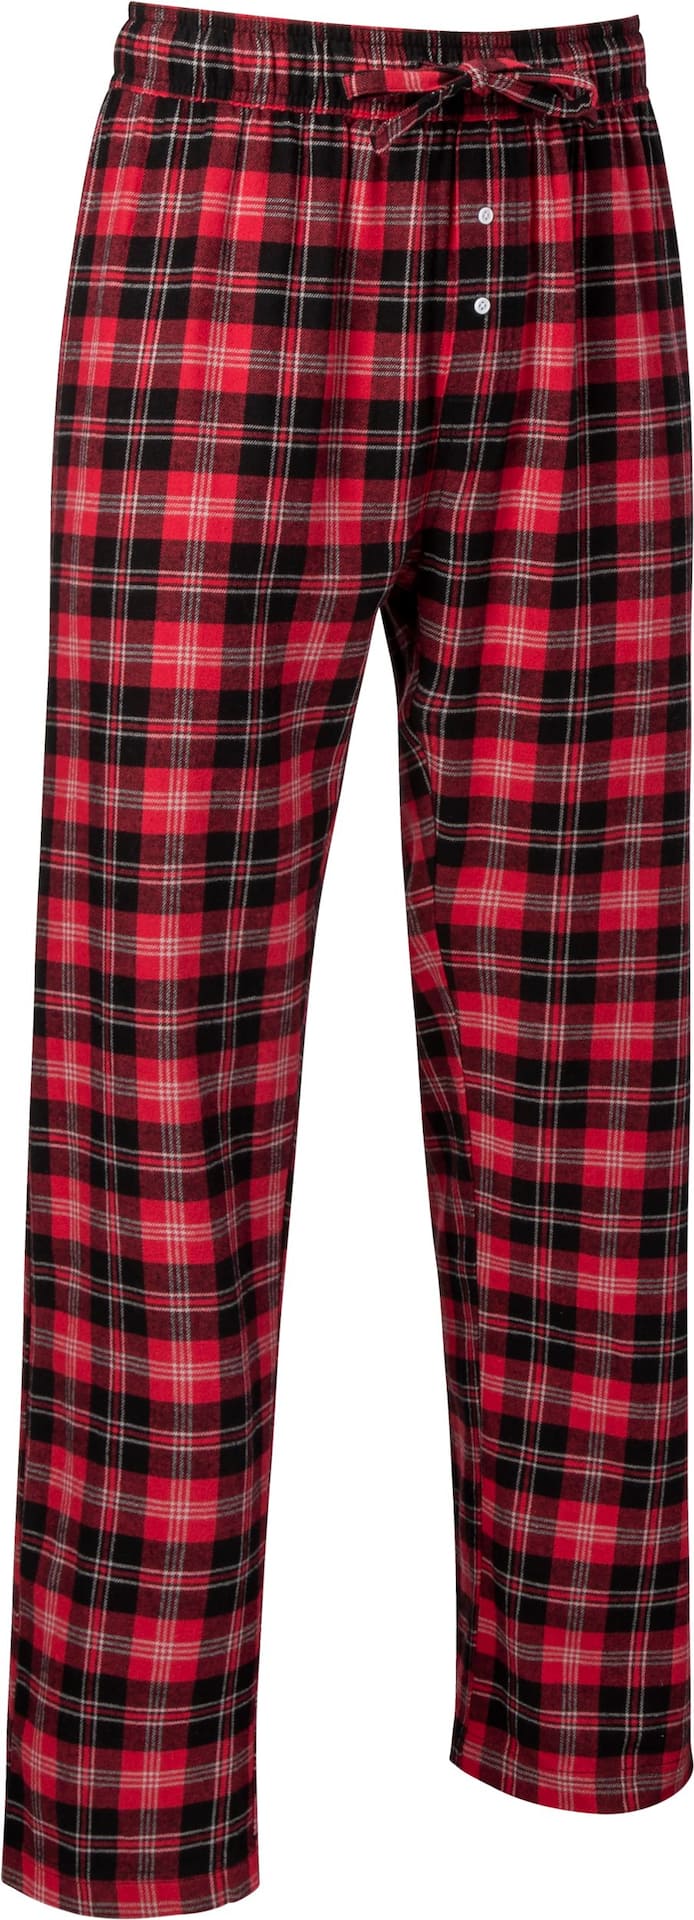 Pjama Down Under - With Pjama Treatment Pants you get all the